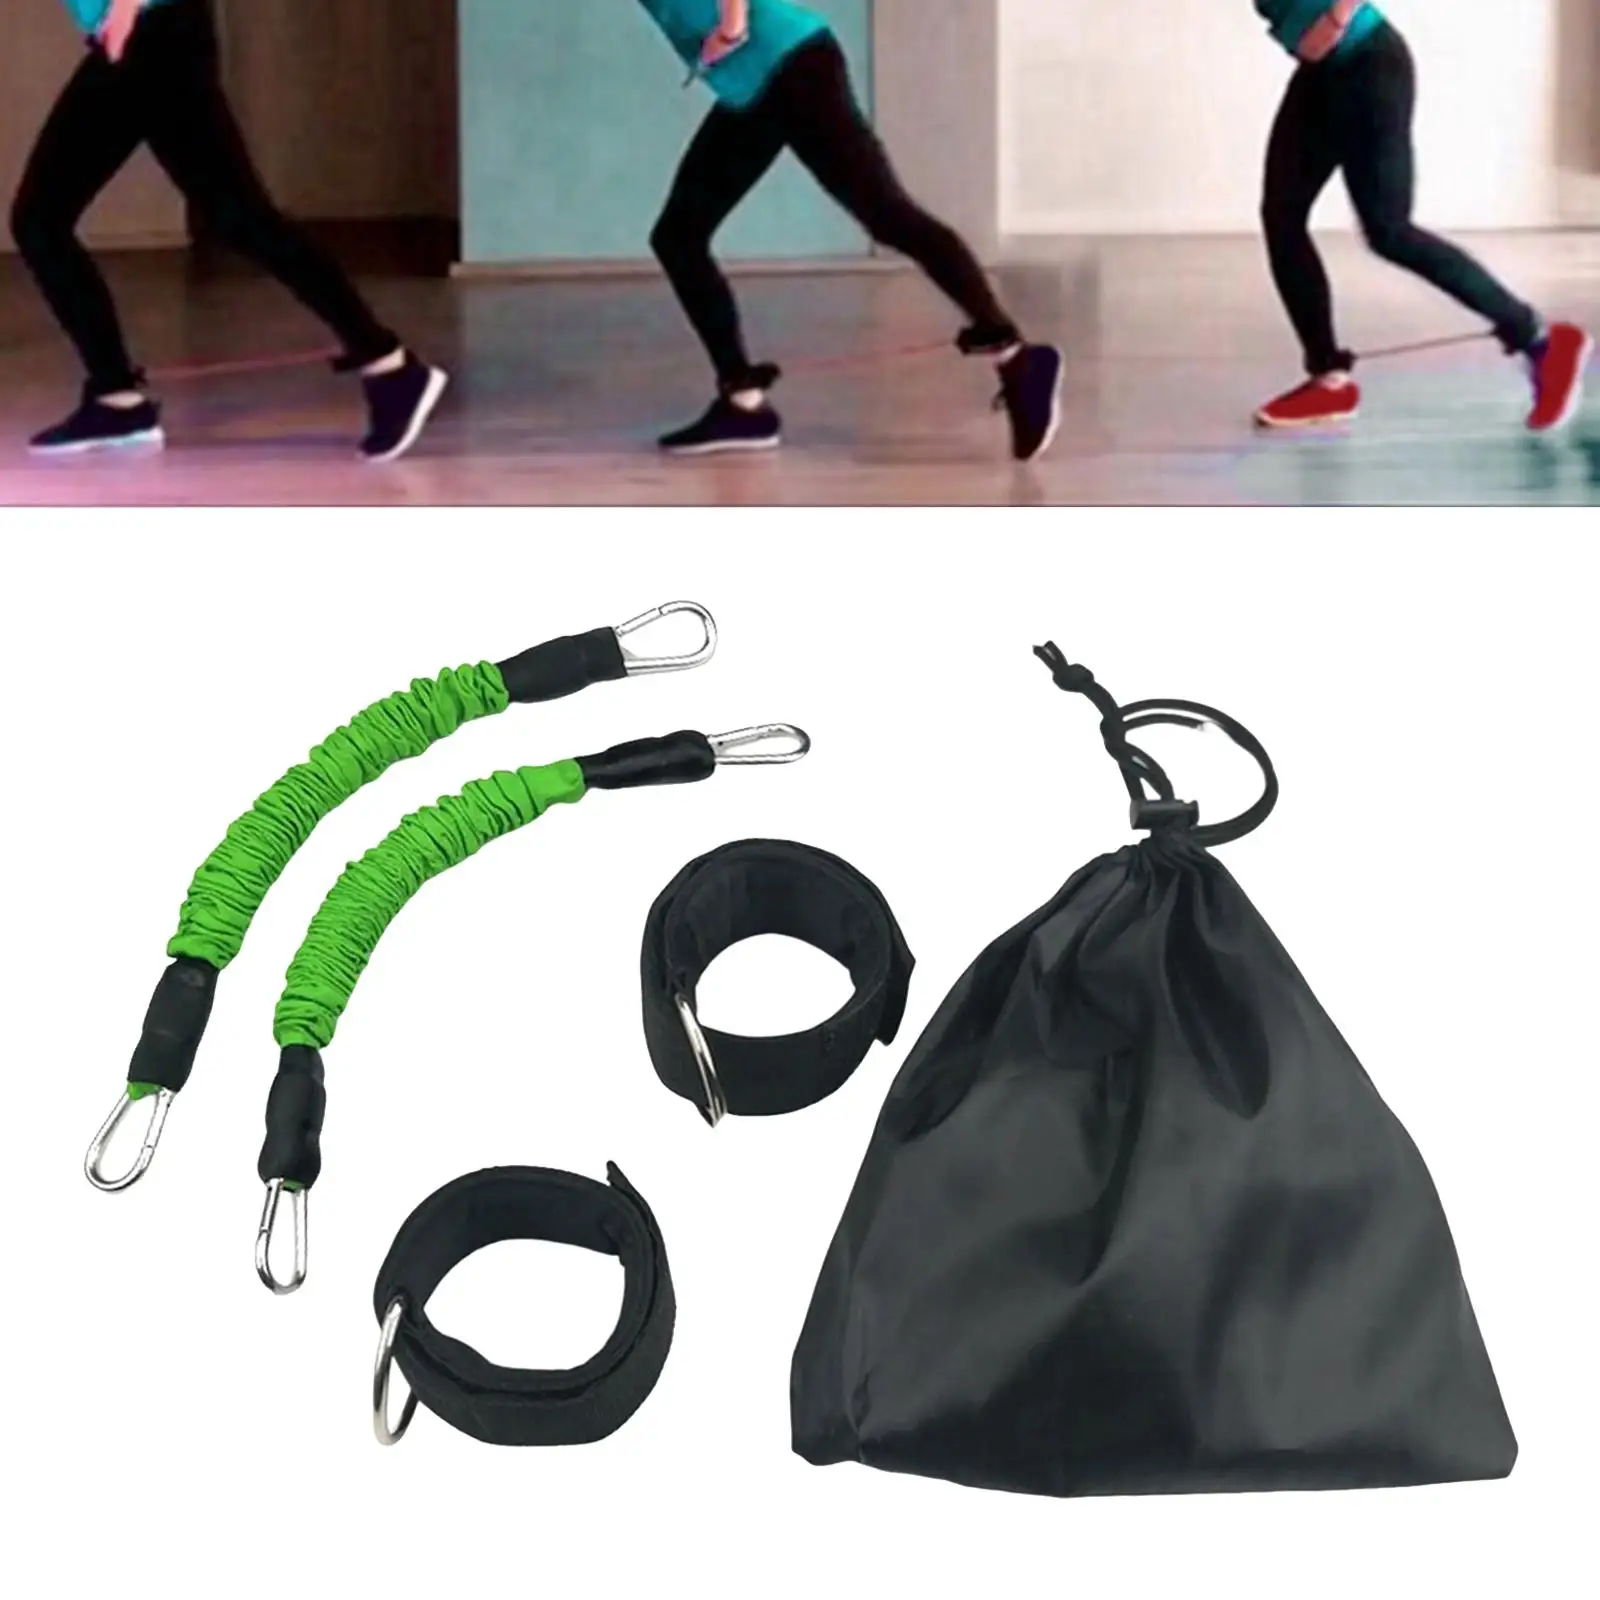 Portable Resistance Bands Strength Training for Fitness Exercise Gifts